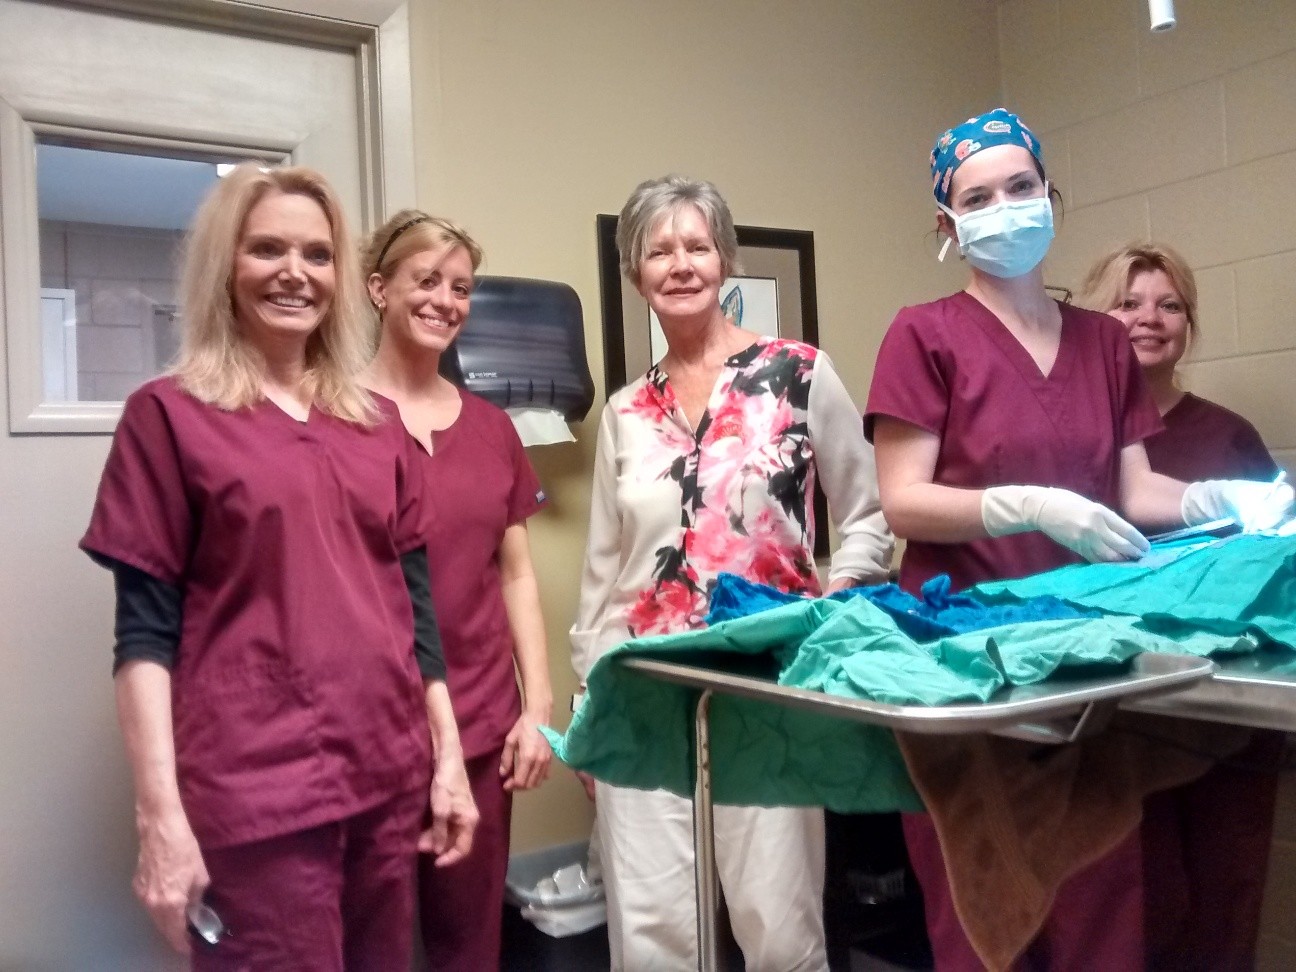 Pictured left to right: Carolyn Smith, St. Augustine Humane Society’s executive director; Emily Billingsley, veterinary technician; Donna Chambers, a visiting volunteer with the Spay Neuter Kingston Initiative in Kingston, Ontario, Canada; 
Lauren Rockey, DVM, and Michele Staten, veterinary technician.